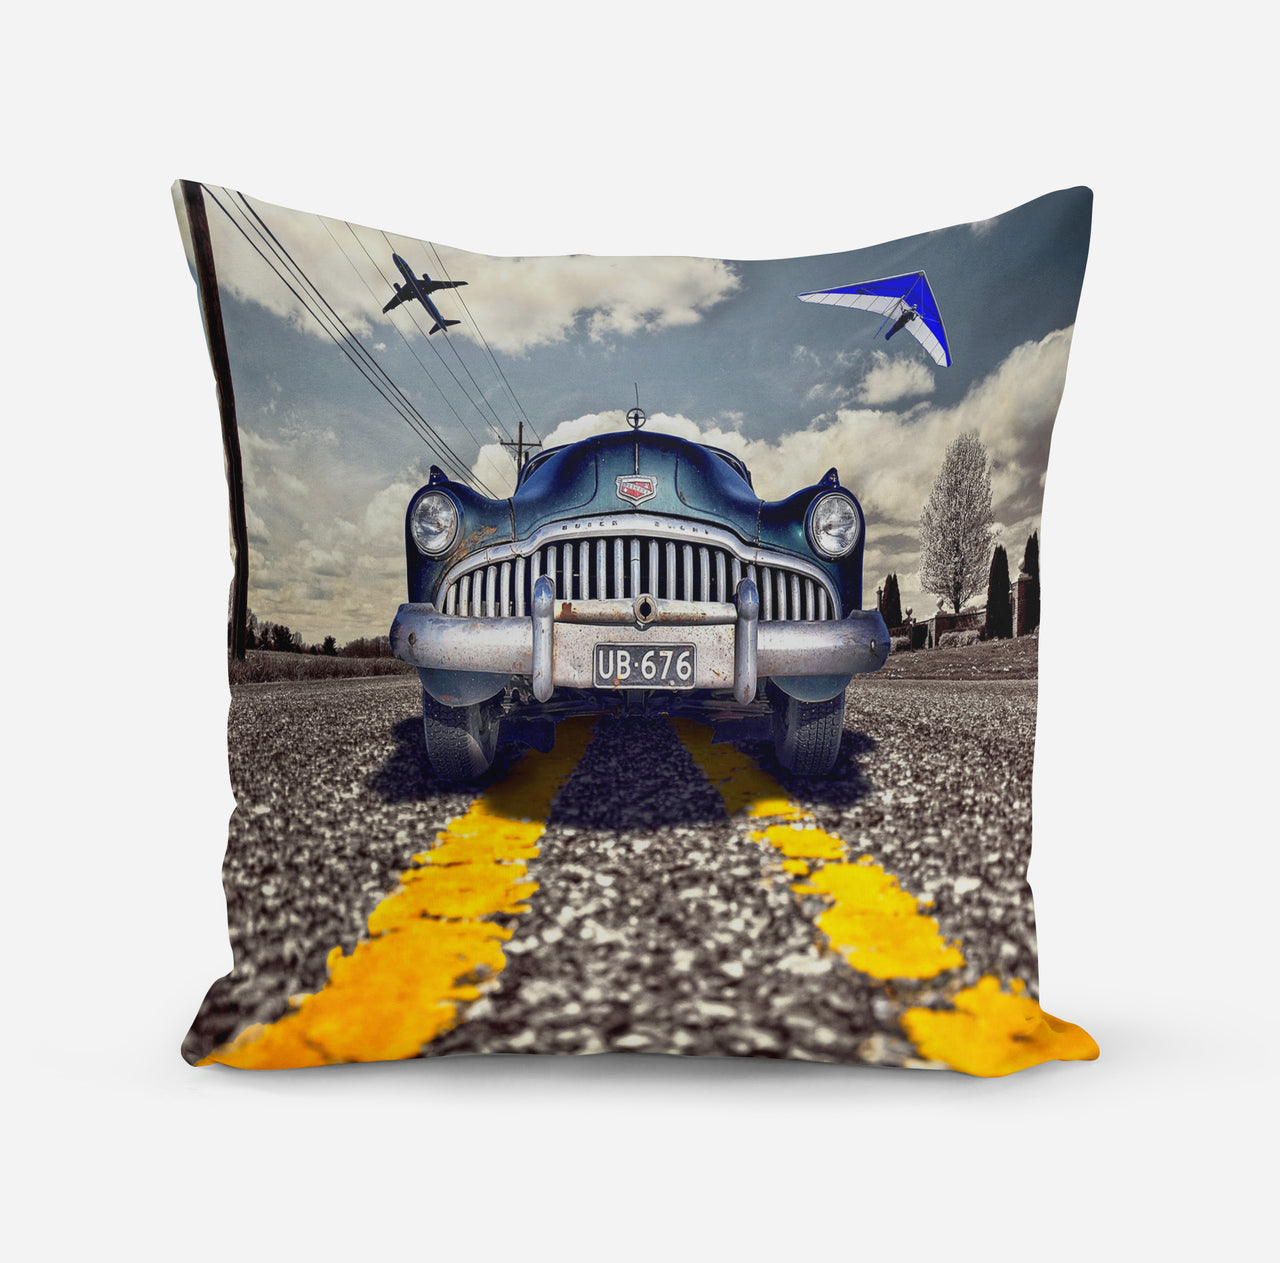 Old Car and Planes Designed Pillows